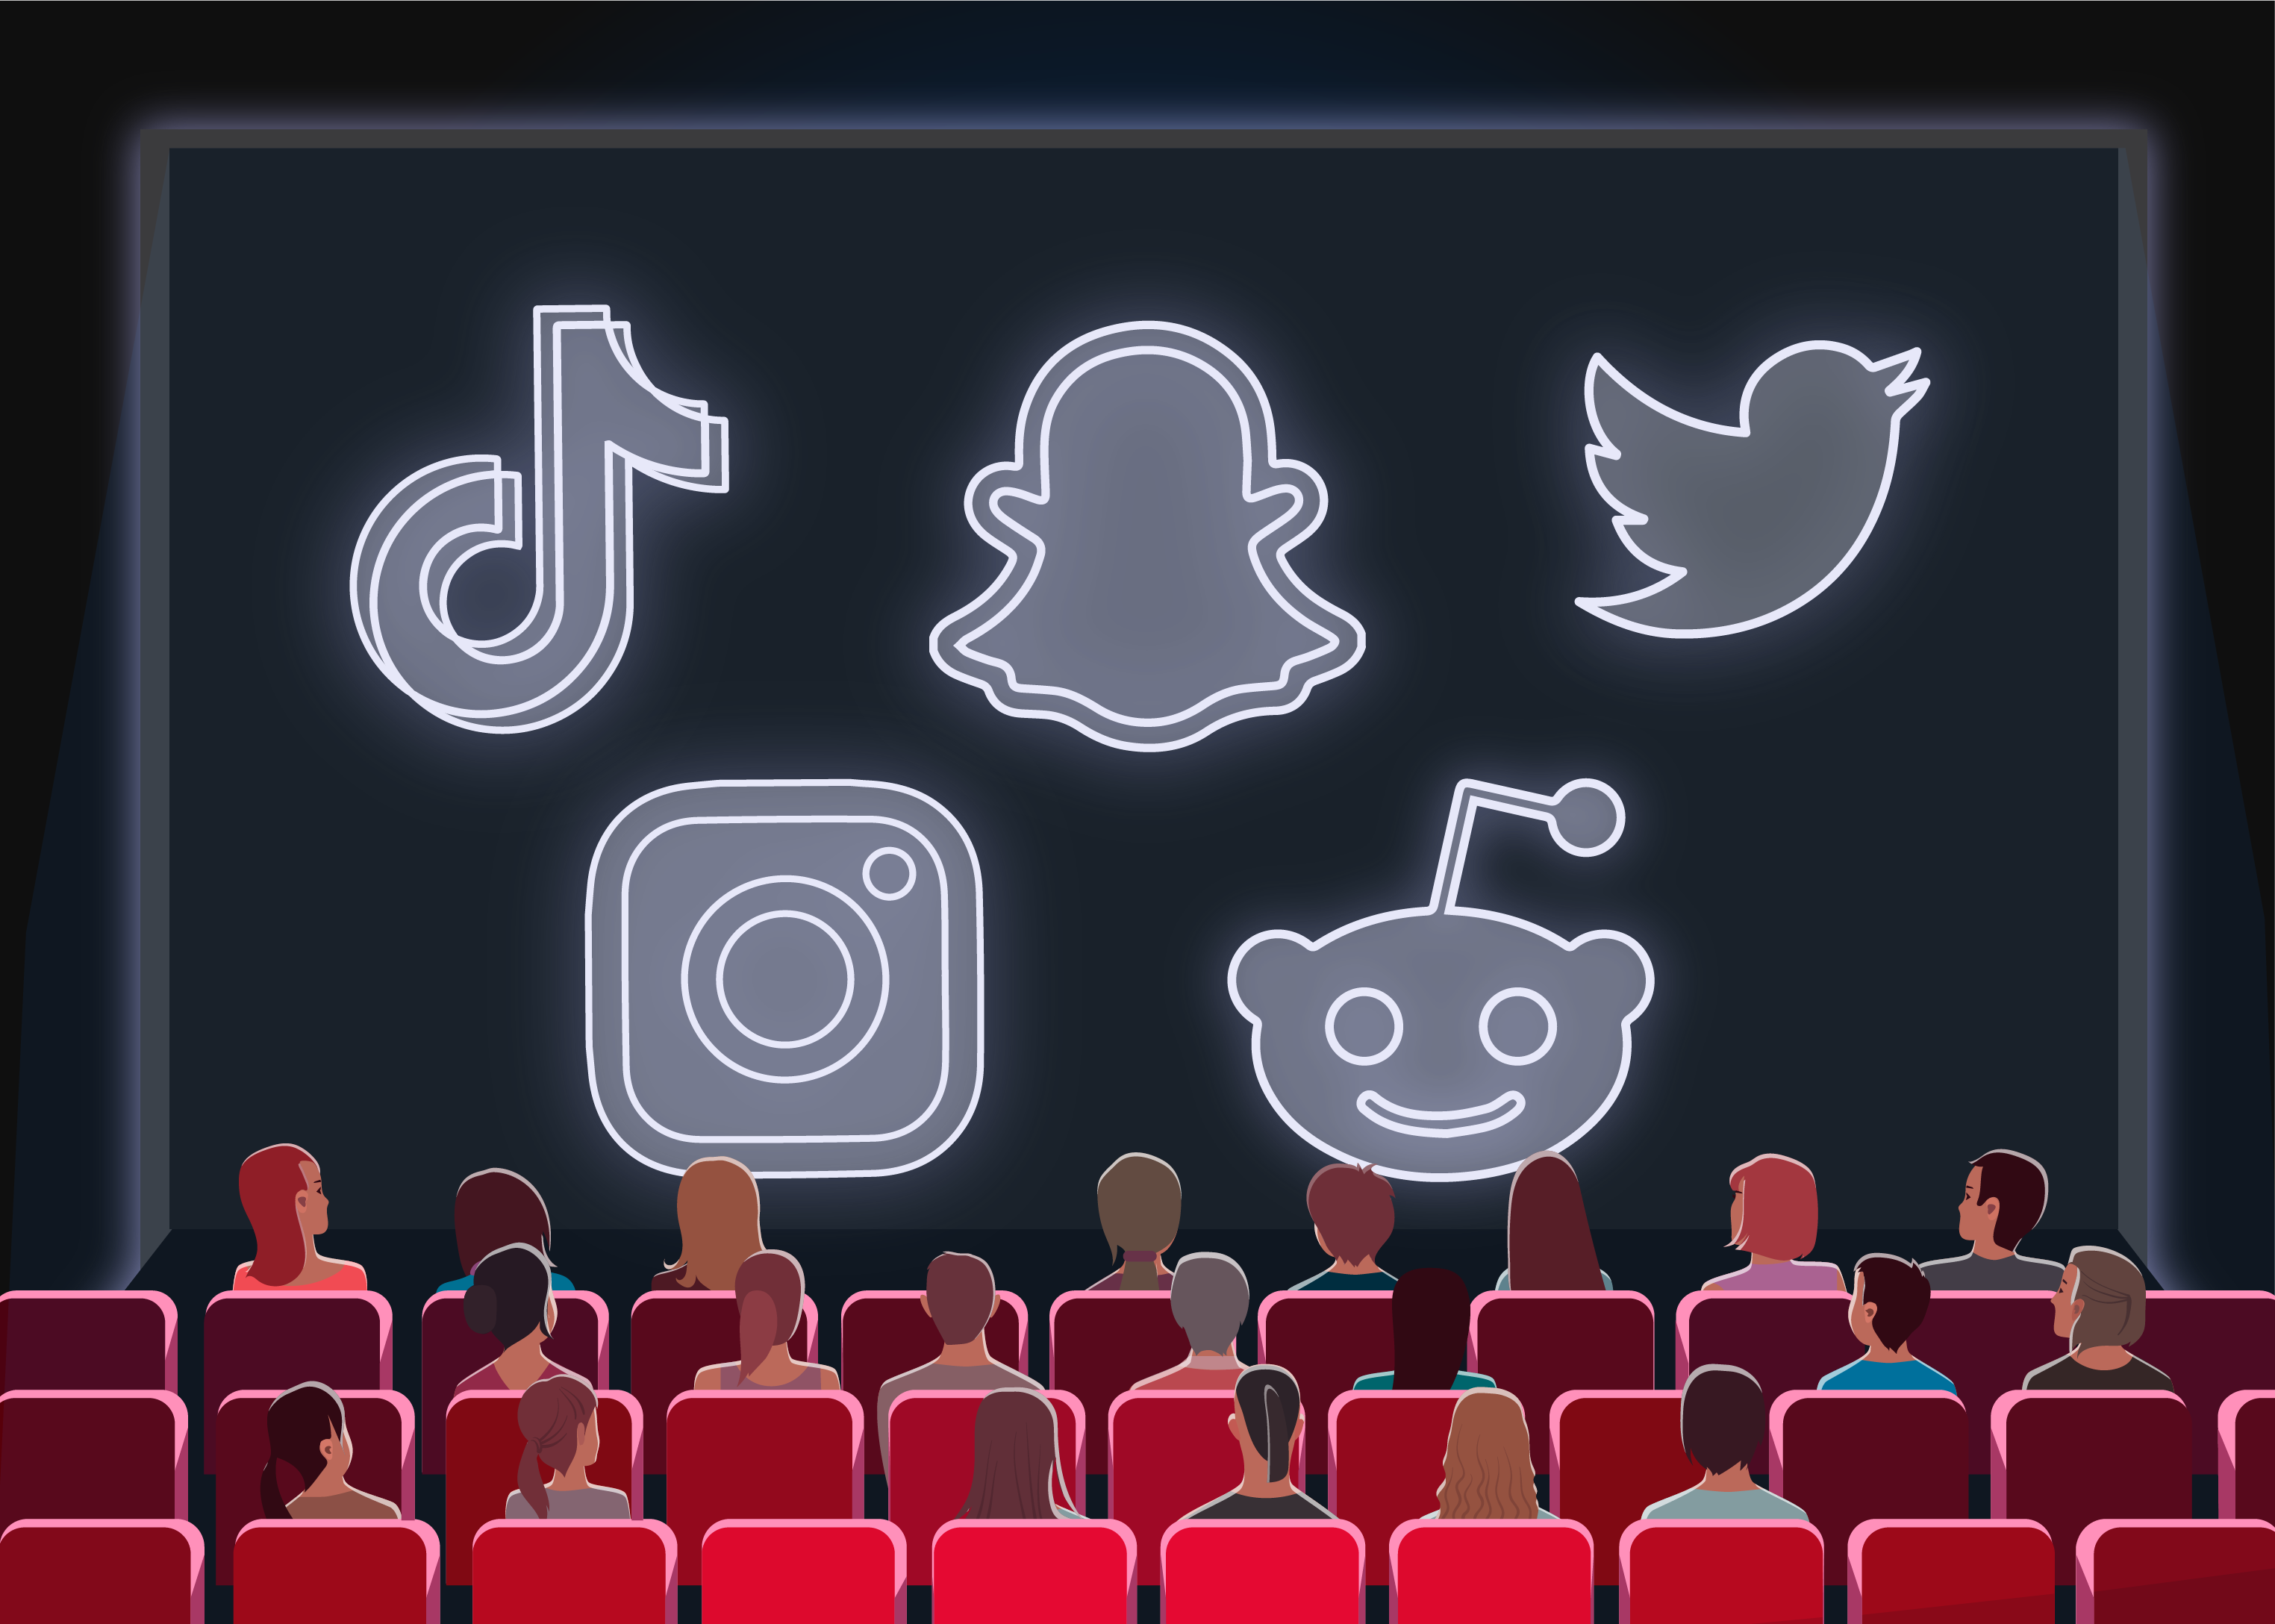 Blockbusters and notifications: How movies and social apps collide.